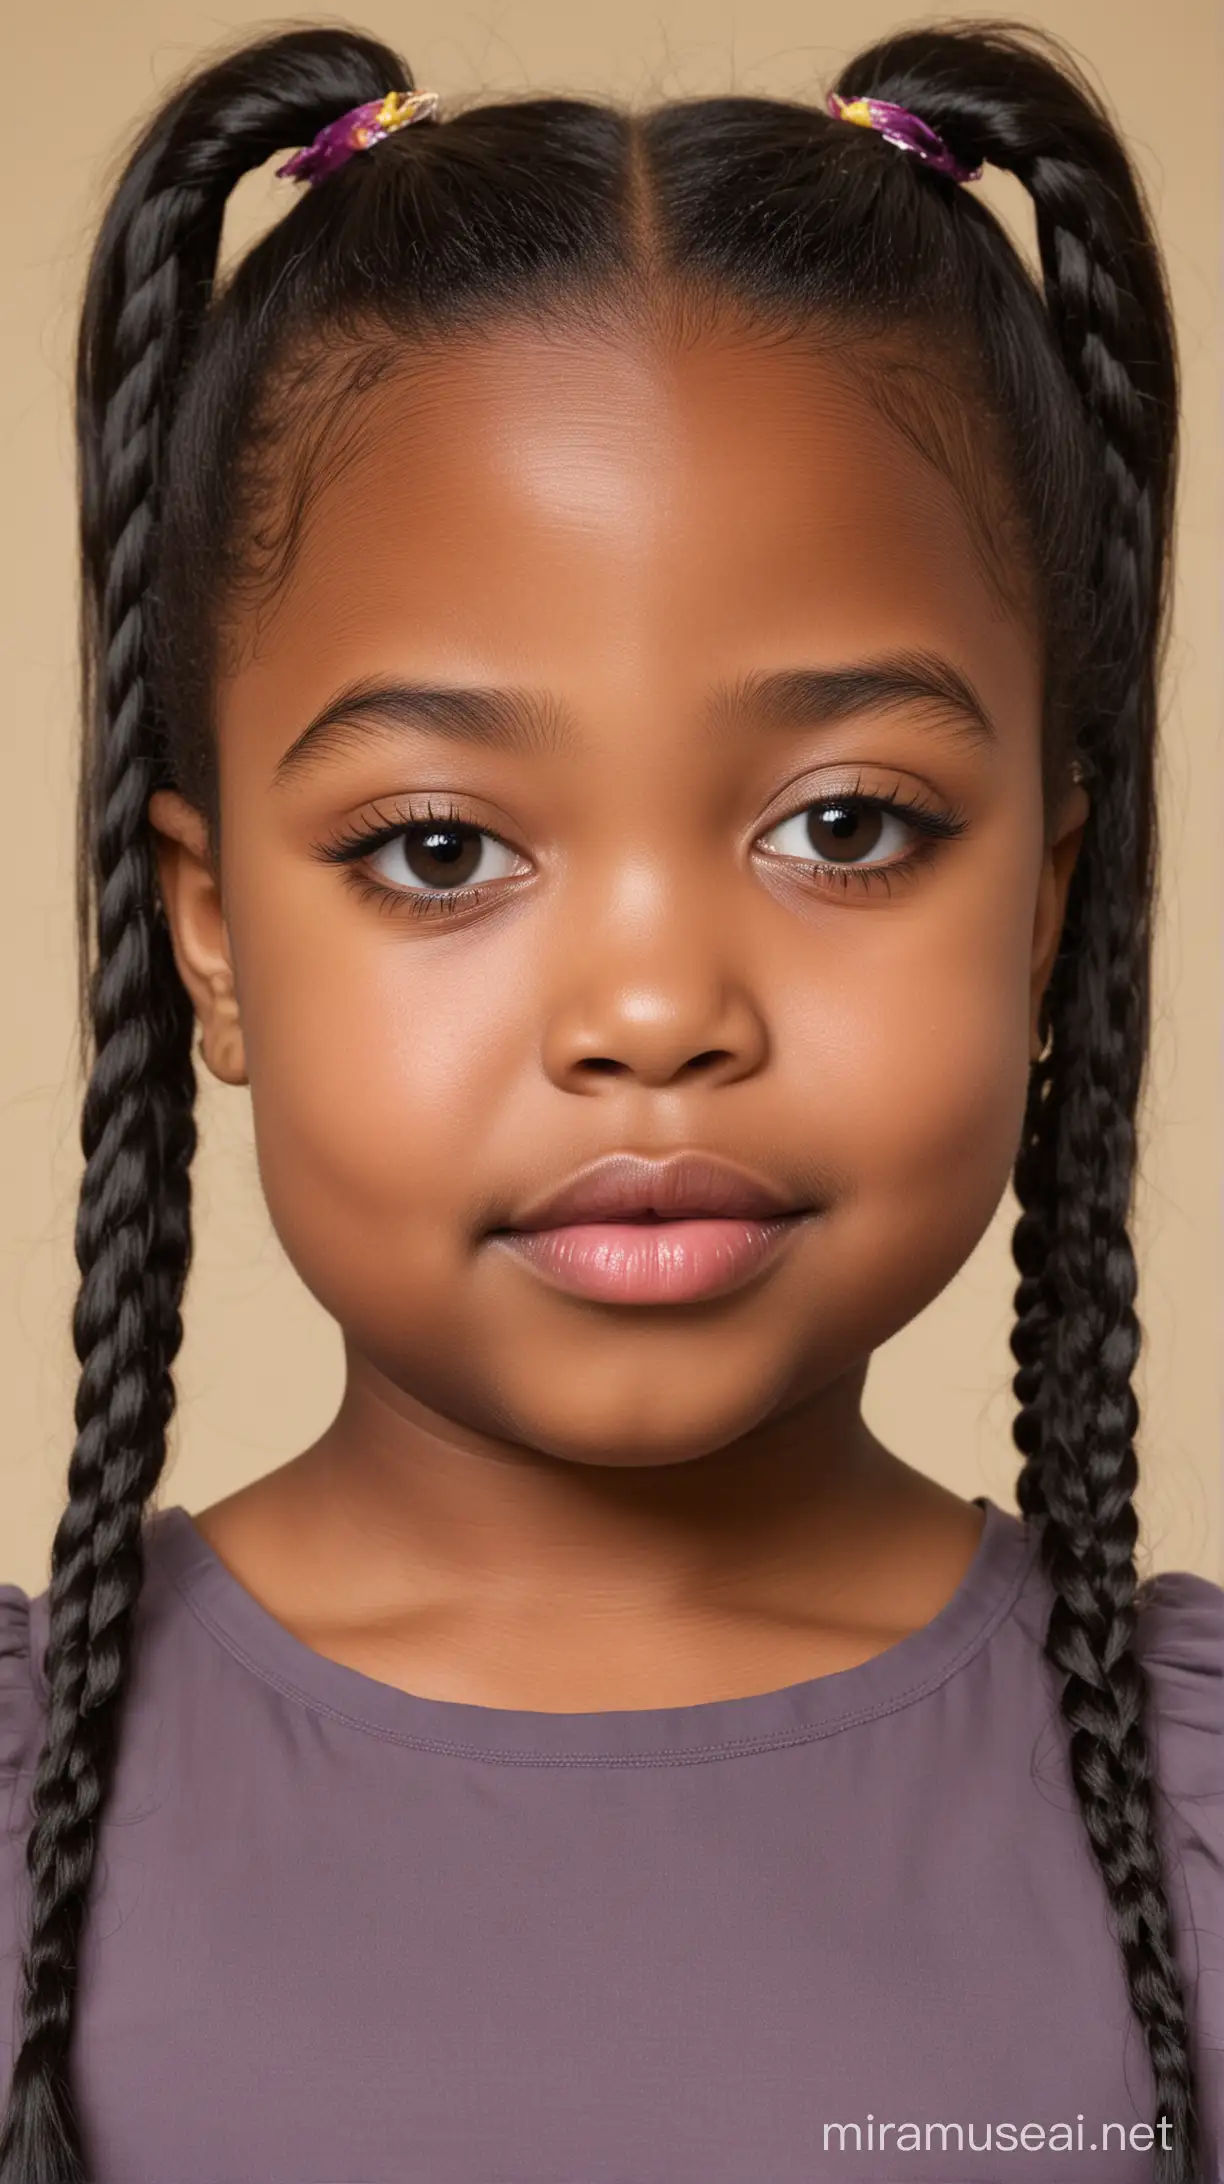 Portrait of a 6YearOld Black Girl in Traditional Attire with Long Pigtail